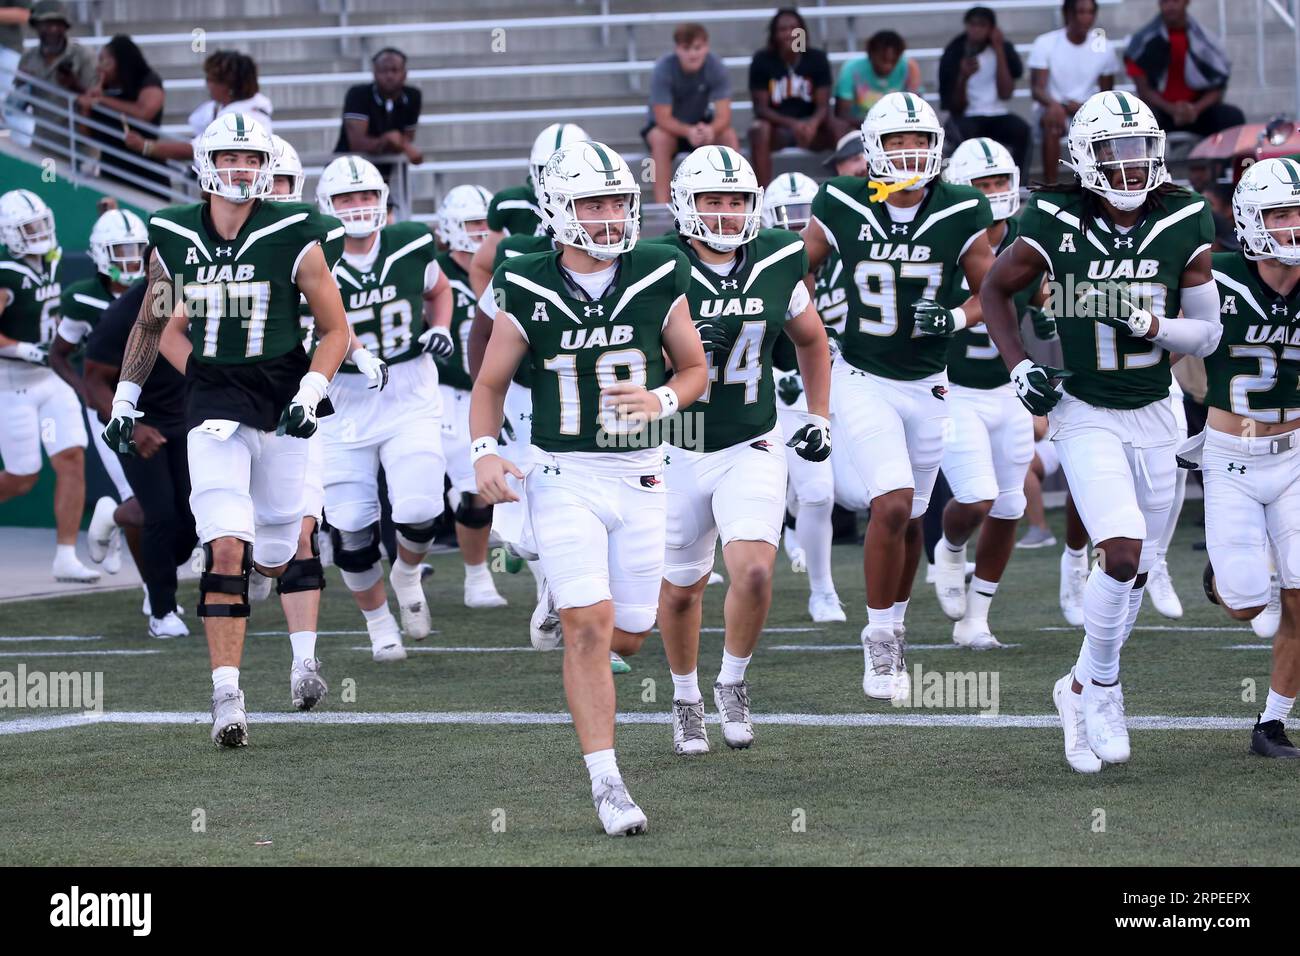 https://c8.alamy.com/comp/2RPEEPX/birmingham-al-august-31-the-uab-blazers-run-onto-the-field-for-the-game-between-the-uab-blazers-and-the-north-carolina-at-aggies-on-august-31-2023-at-protective-stadium-in-birmingham-alabama-photo-by-michael-wadeicon-sportswire-icon-sportswire-via-ap-images-2RPEEPX.jpg